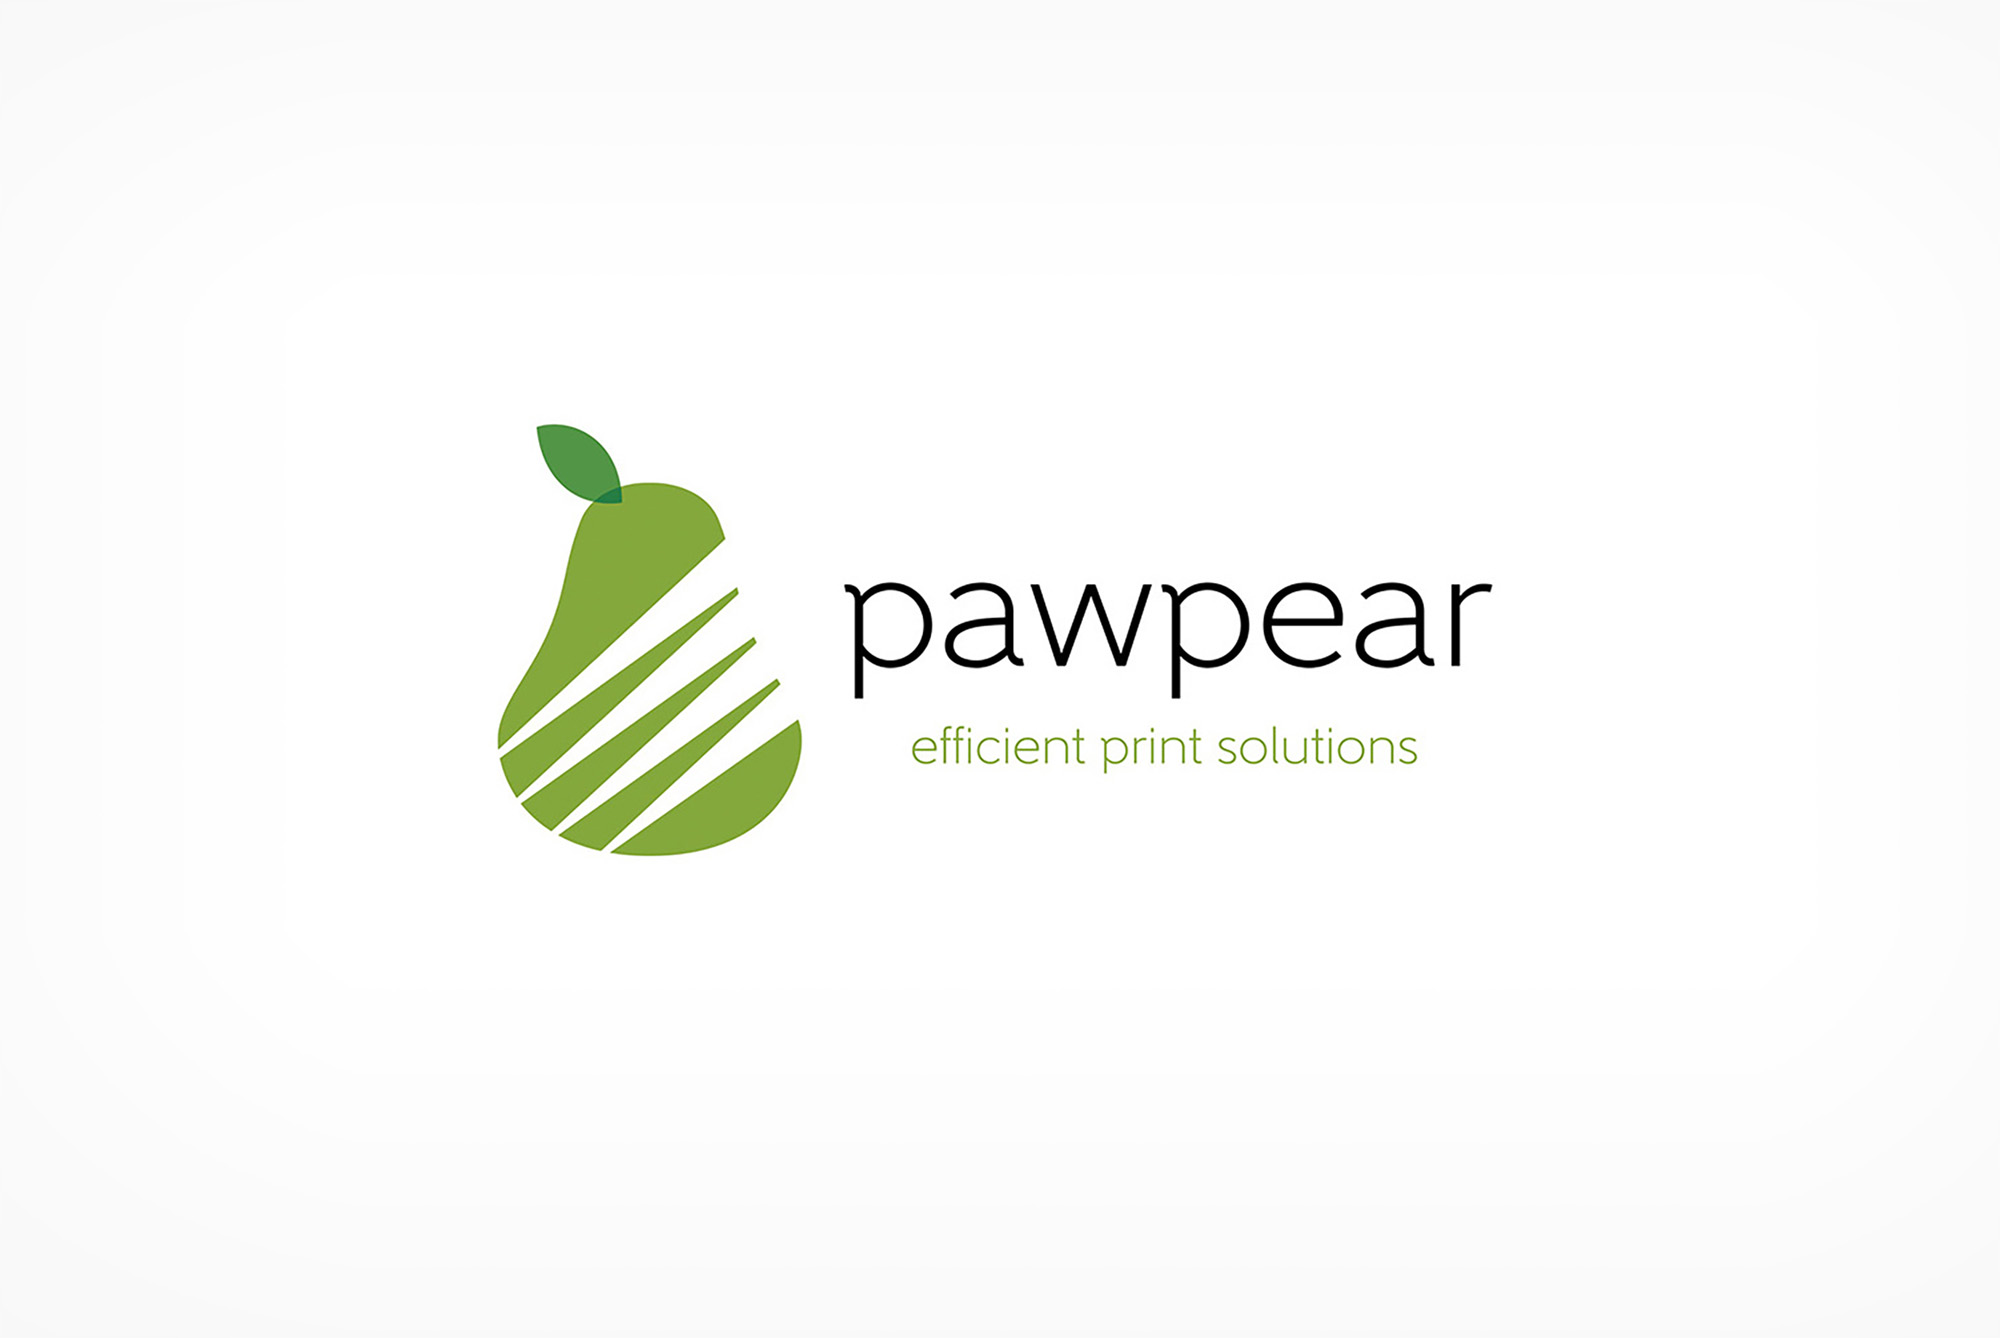 Pawpear | Efficient Print solutions brand logo.